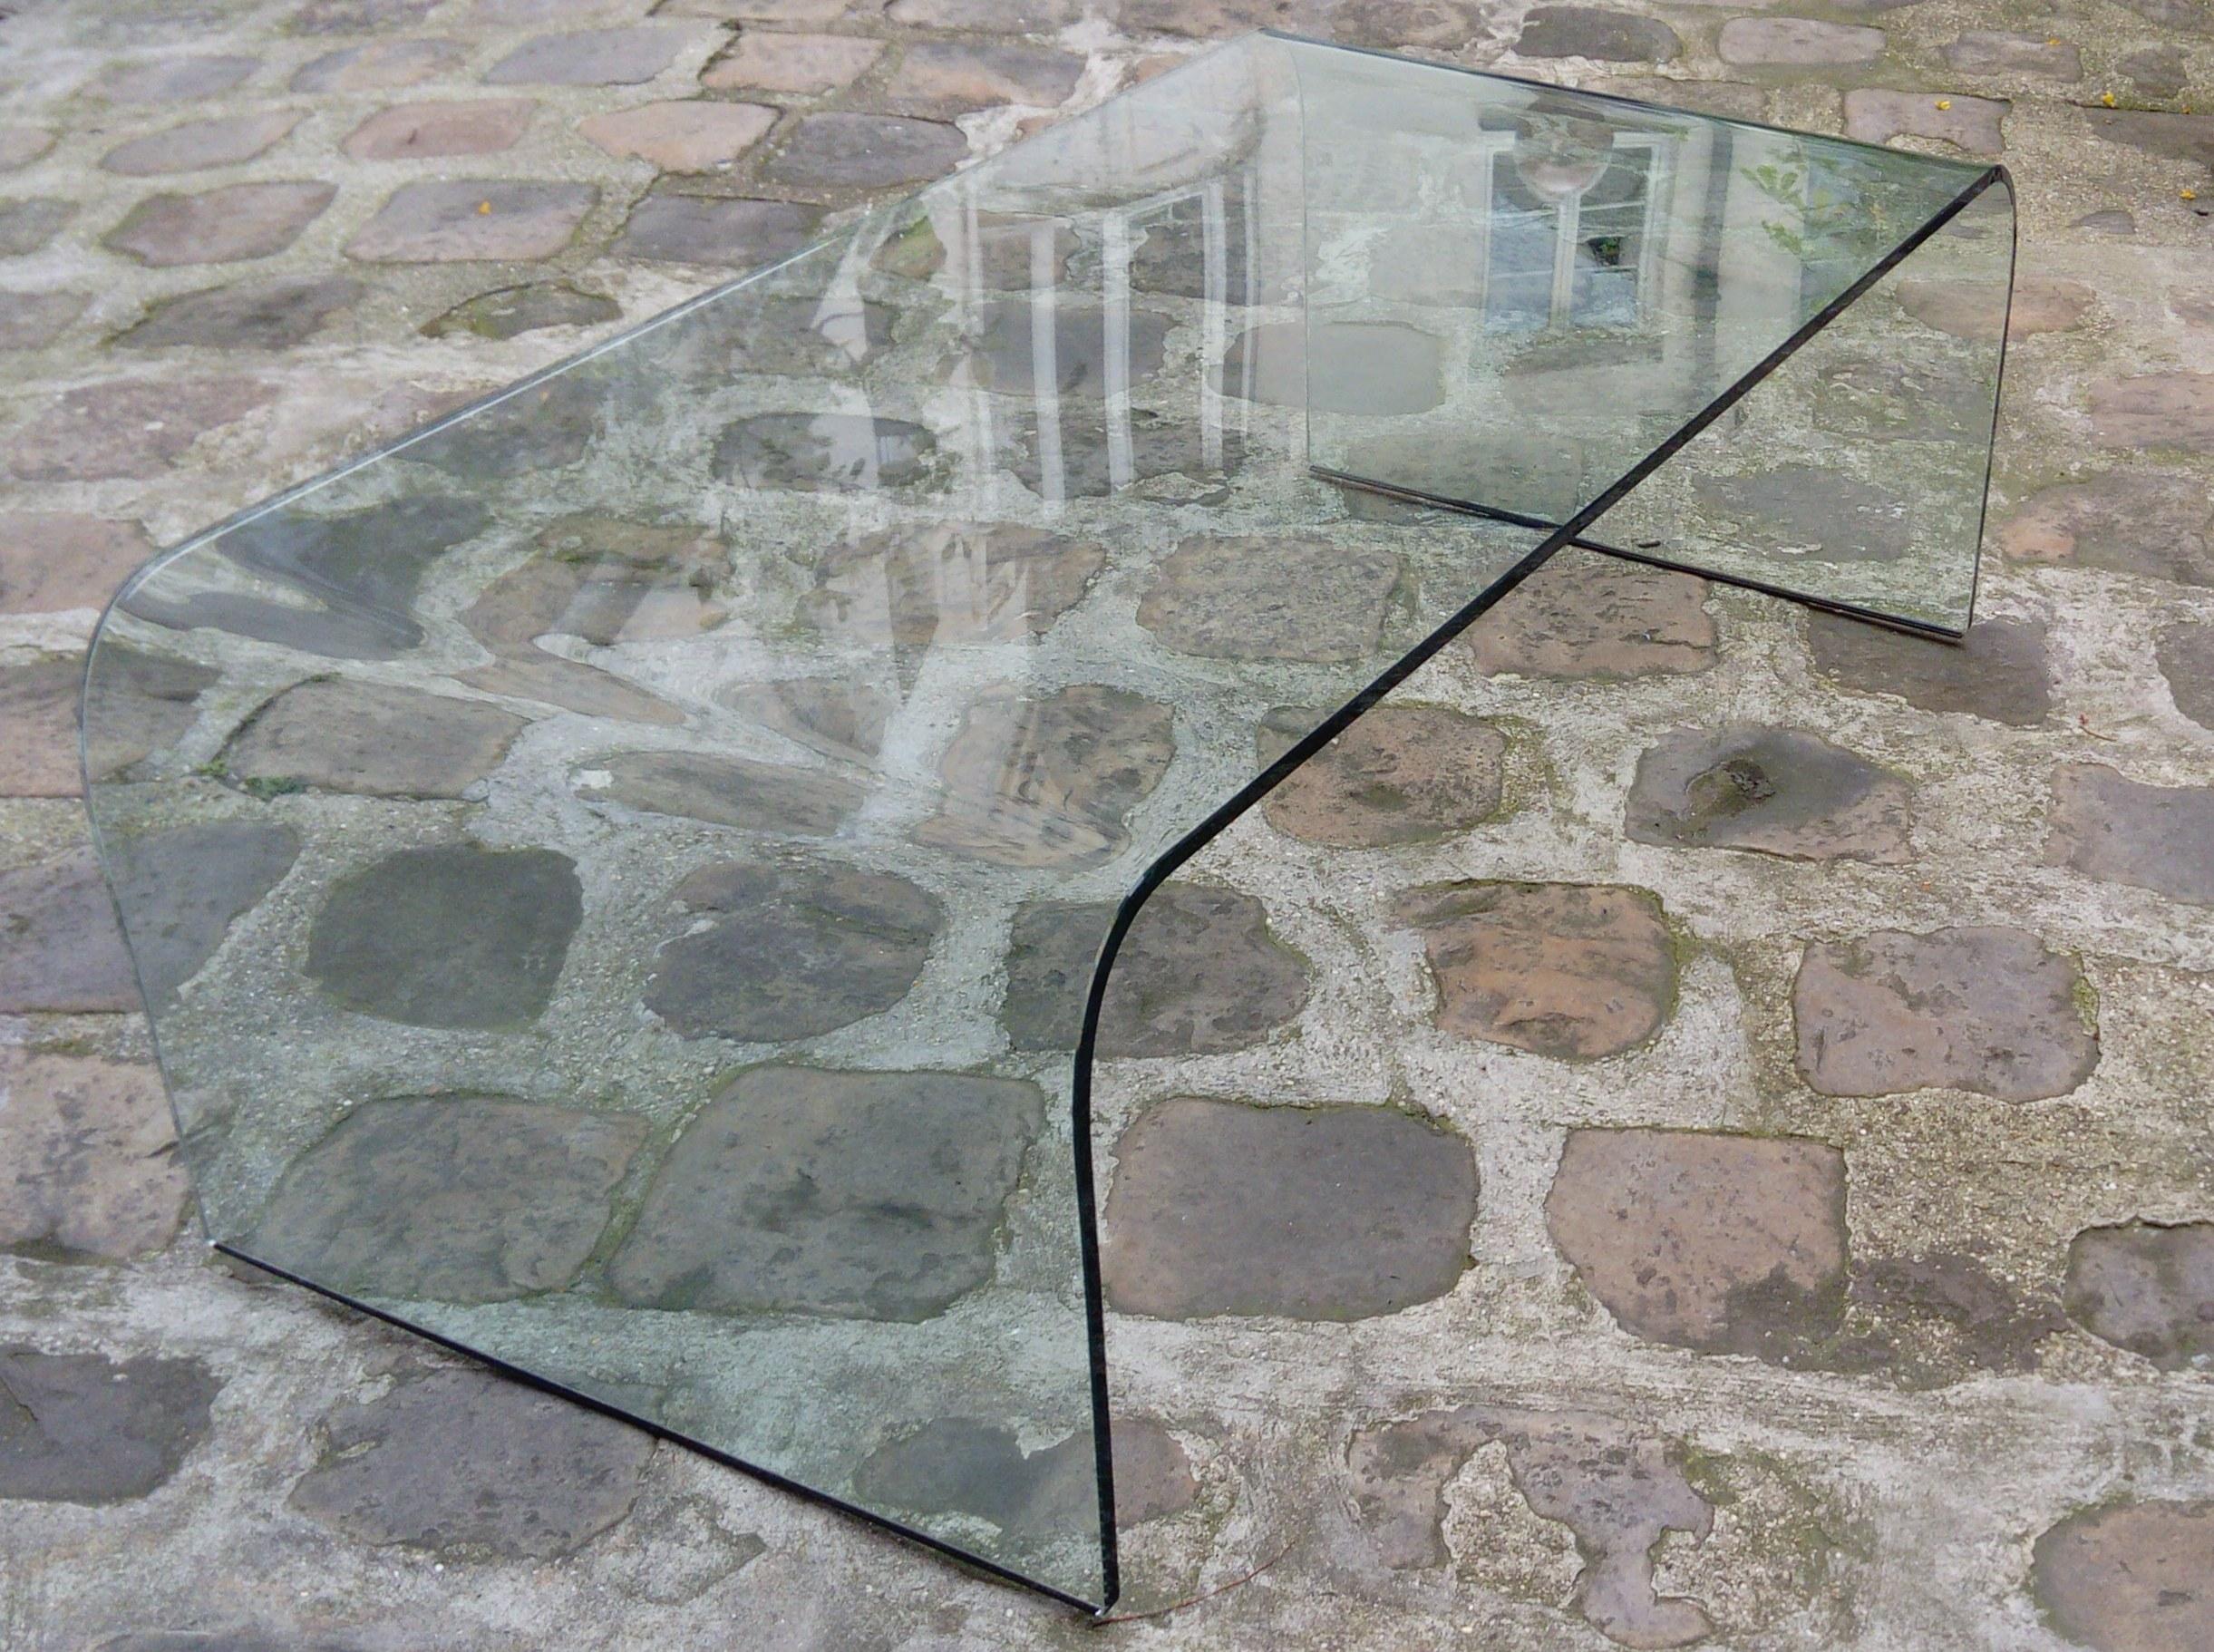 Fiam coffee table:

Vintage coffee table by Angelo Cortesi - Fiam Italy Edition, circa 1980
Material: Glass
Dimensions: L 120 x D 60 x H 40 cms
Signed FIAM ITALIA on one side of the glass.
Very good condition!